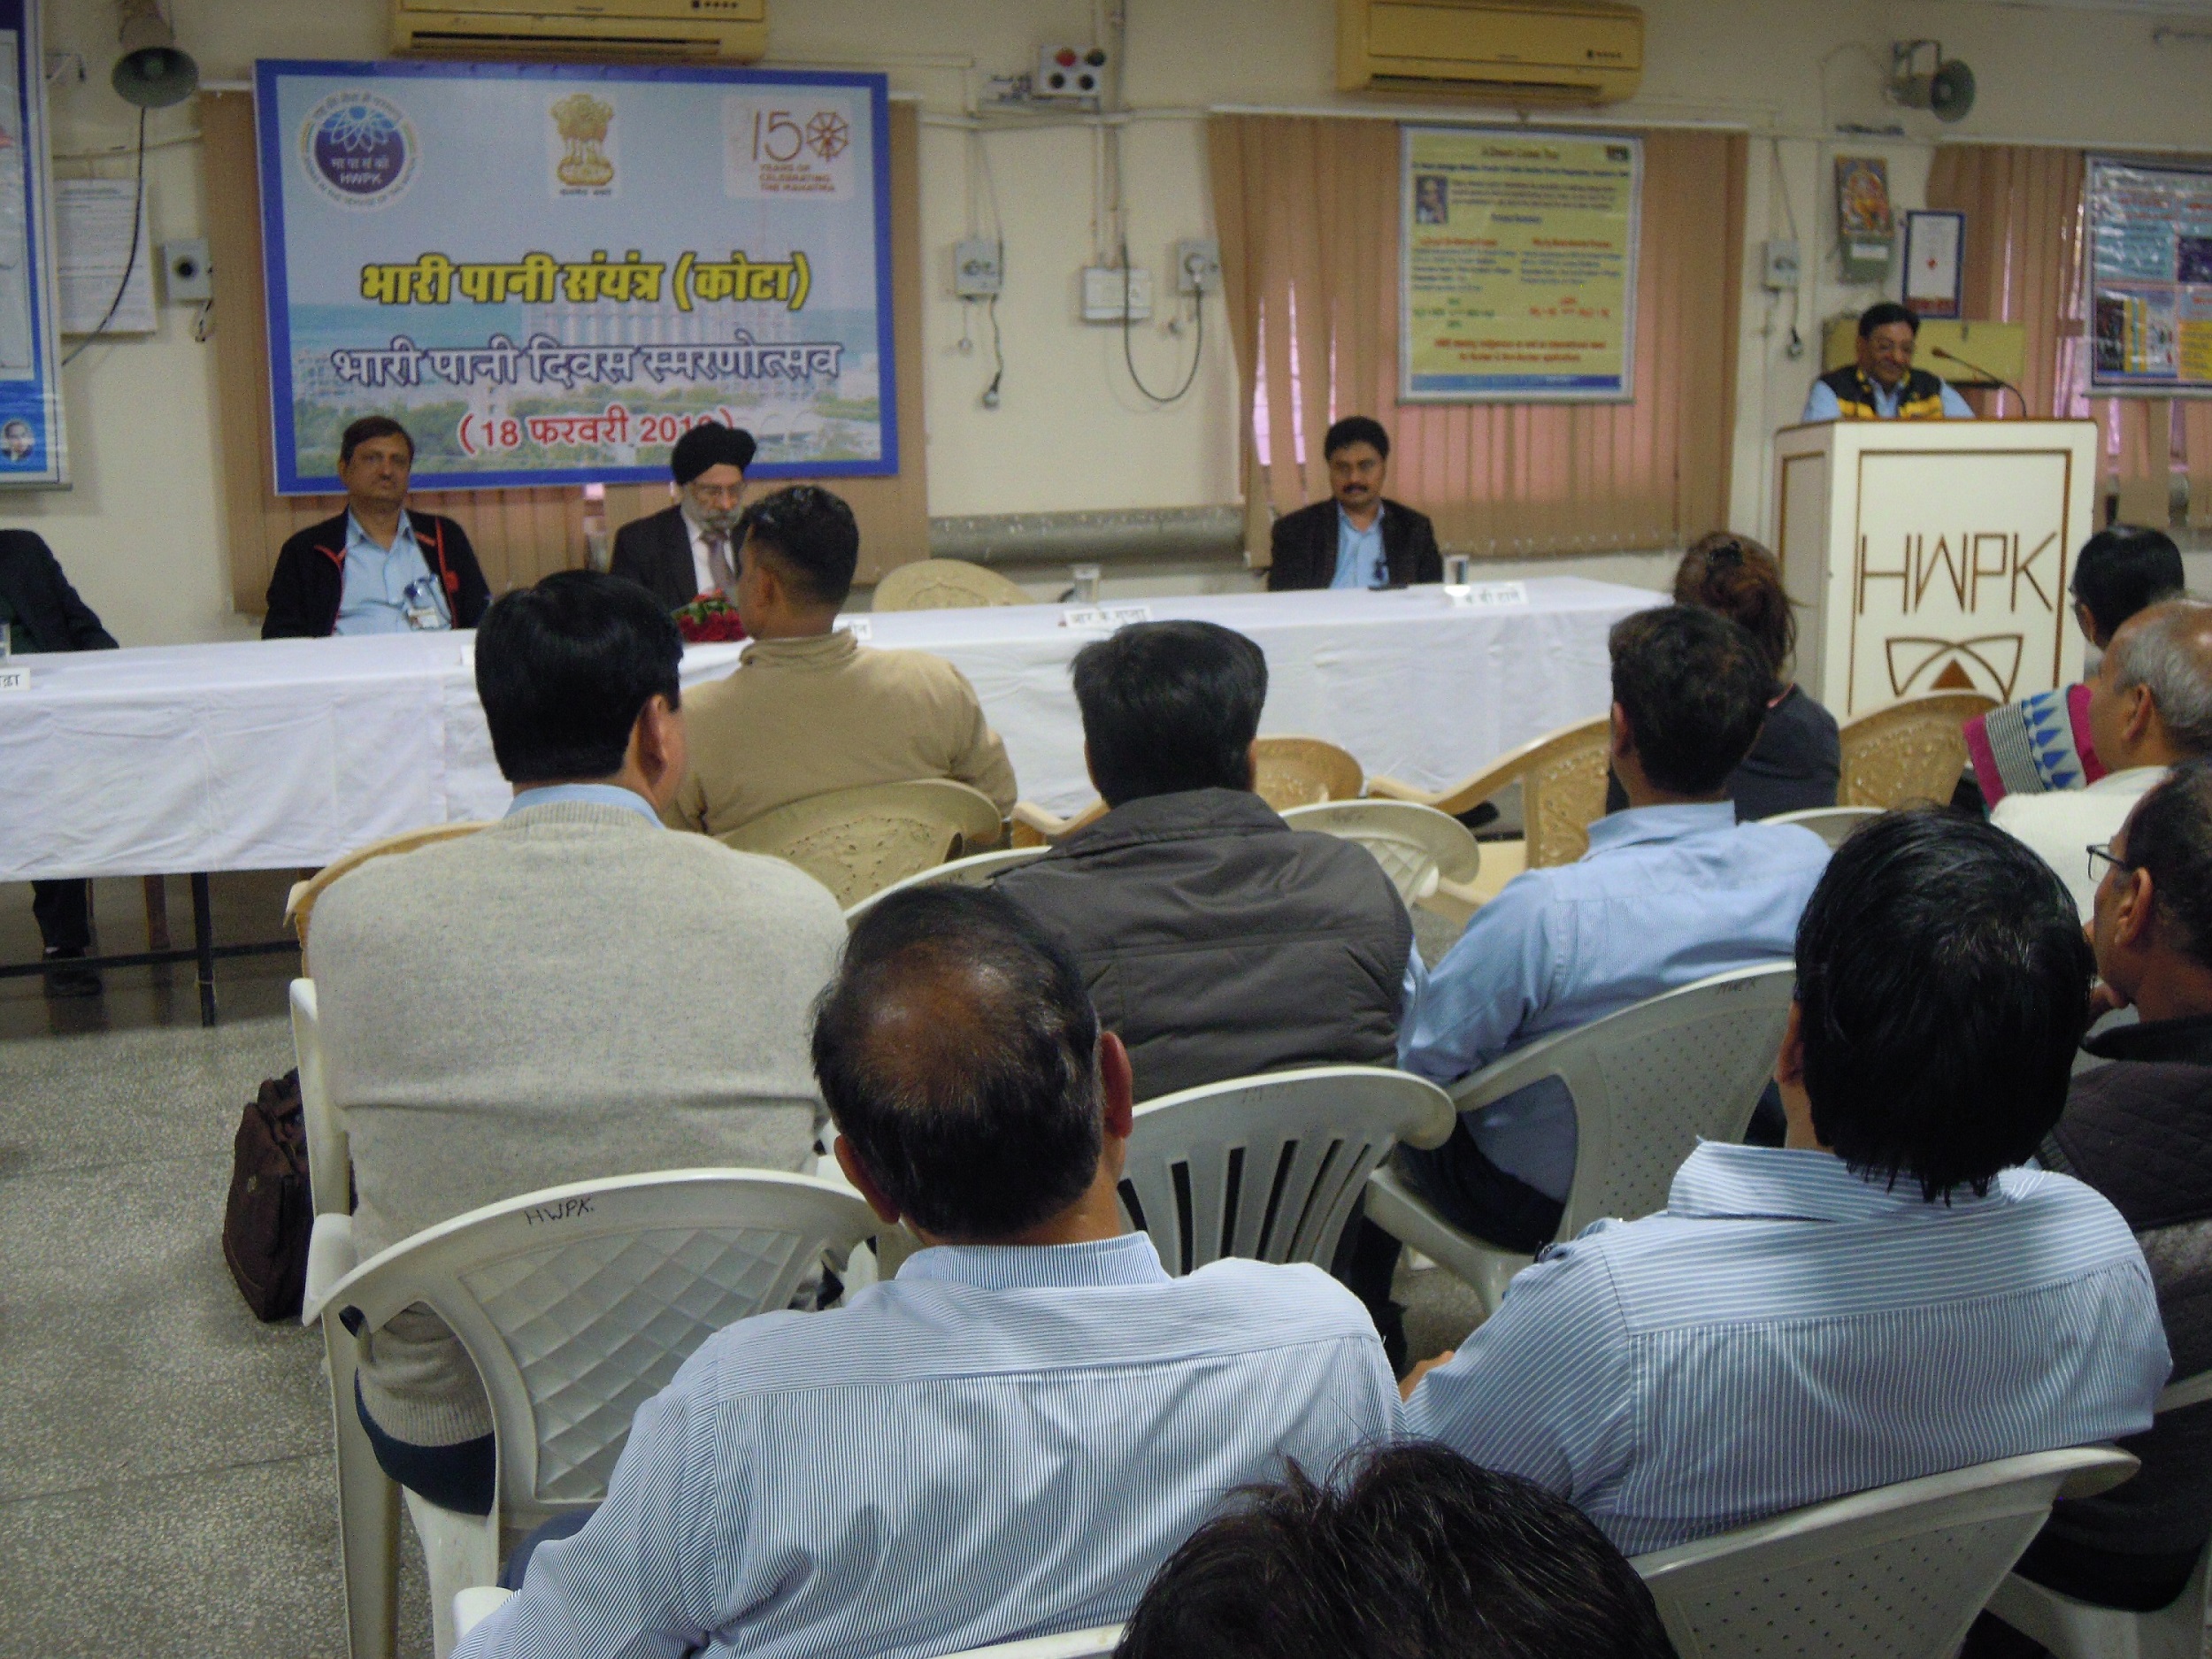 CGM HWPK Addressing about Heavy Water Production Journey from Struggle to Self Reliance.JPG